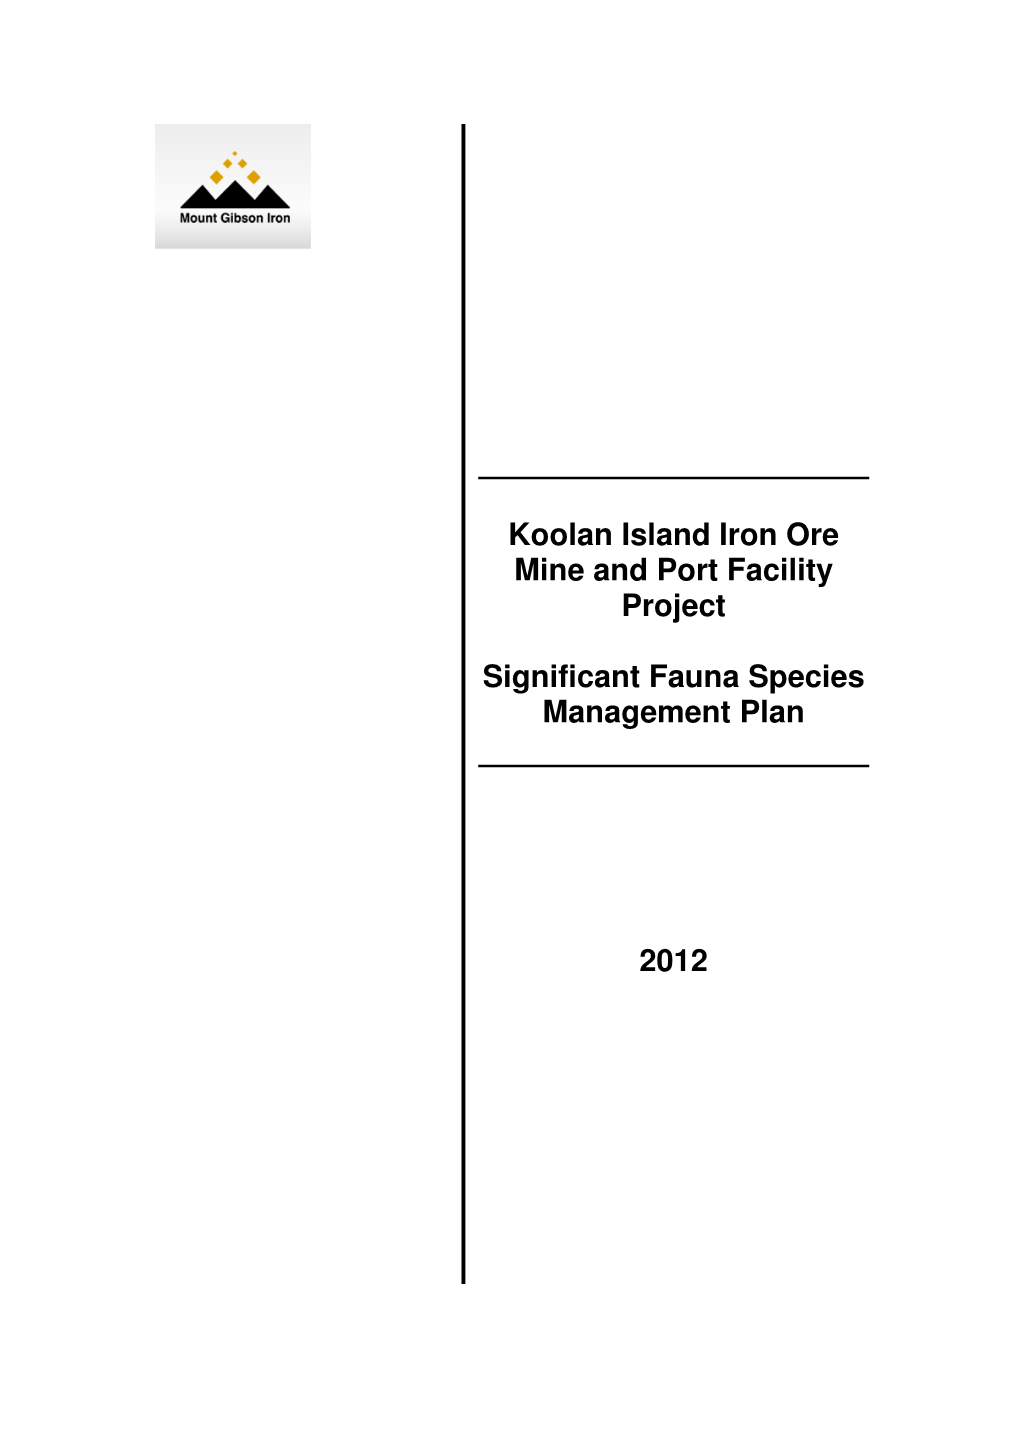 Koolan Island Iron Ore Mine and Port Facility Project Significant Fauna Species Management Plan